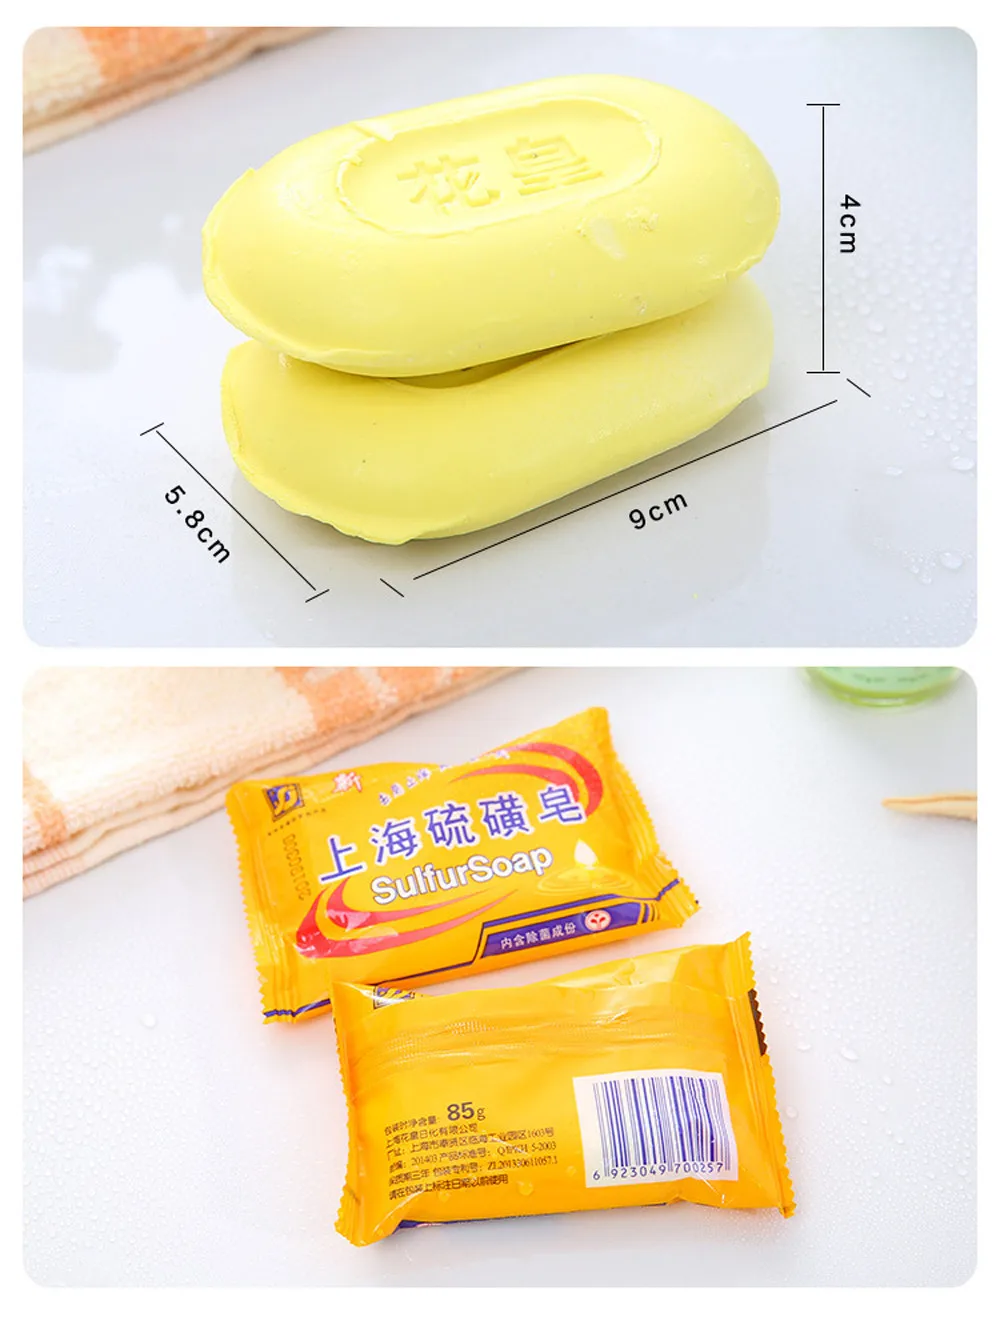 Shanghai 86g Whitening Sulfur Soap Eczema Stop Itching Acne Inexpensive Cure Anti Fungus Dermatitis Oil-control Base 3 | Дом и сад